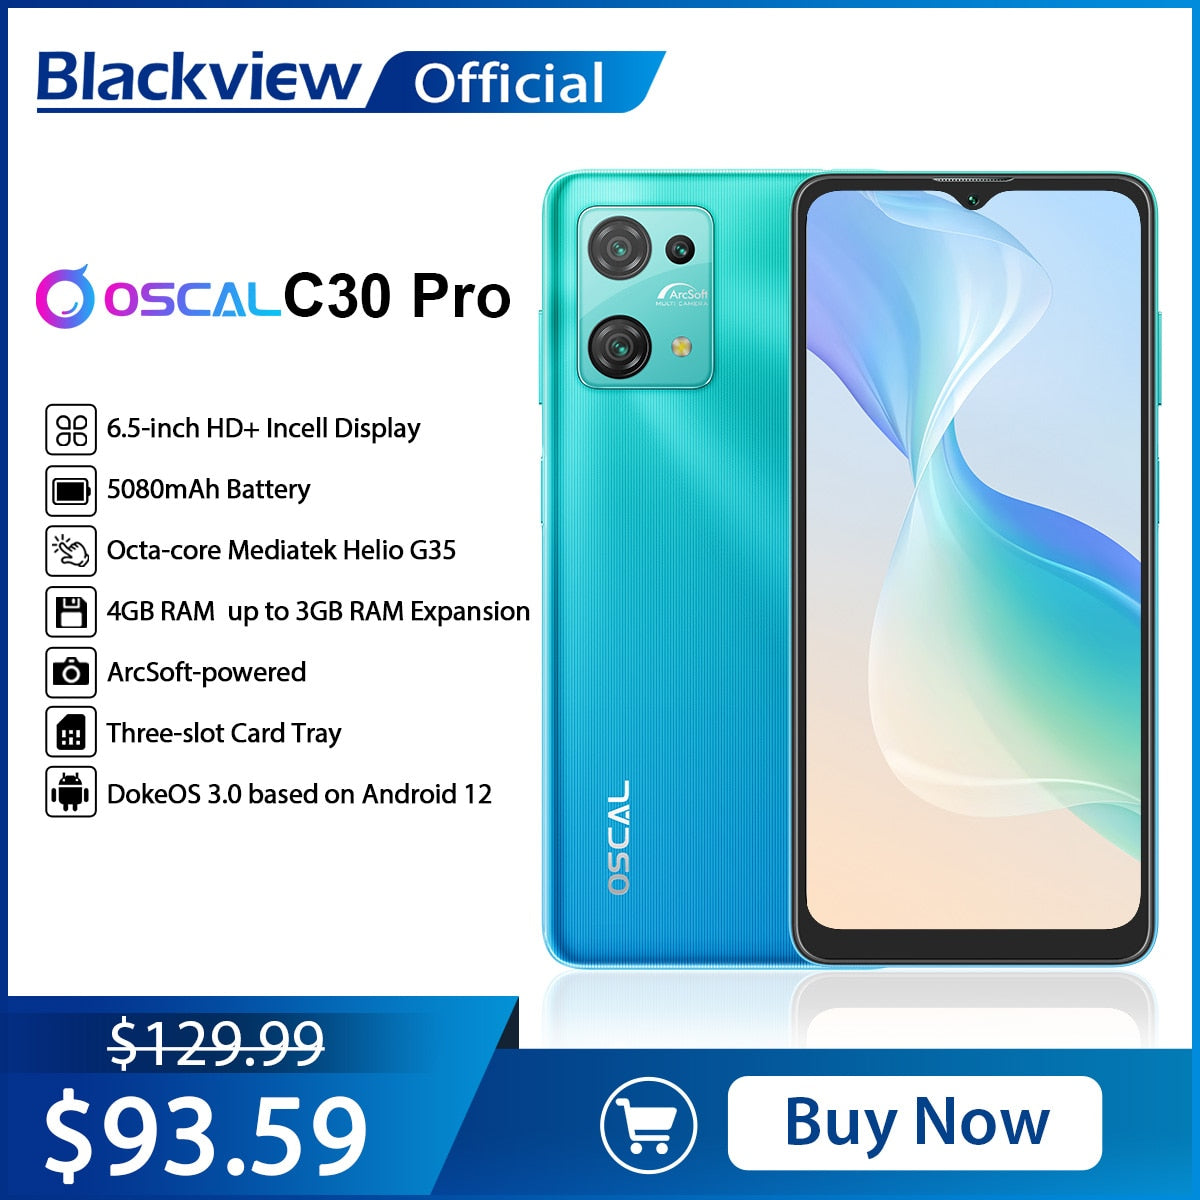 Blackview Oscal C30 Pro Android 12 Smartphone 7GB+64GB 6.5 Inch Mobile Phones 5080mAh Battery Dual 4G Telephones, Cellphone